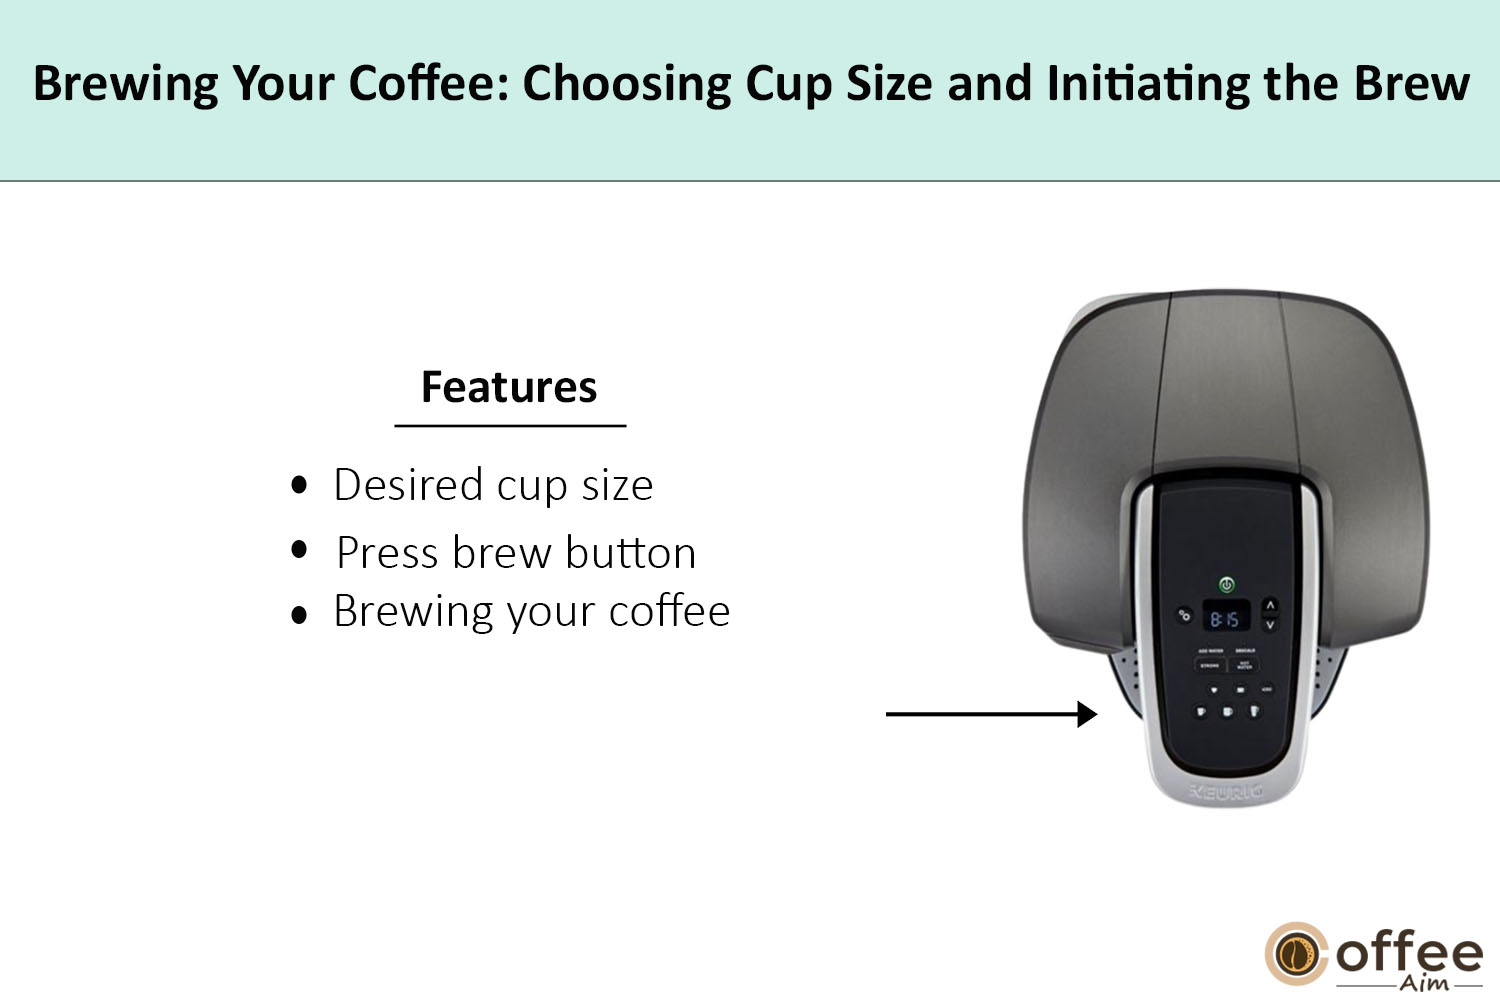 In this image, I elucidate the brew cup sizes.